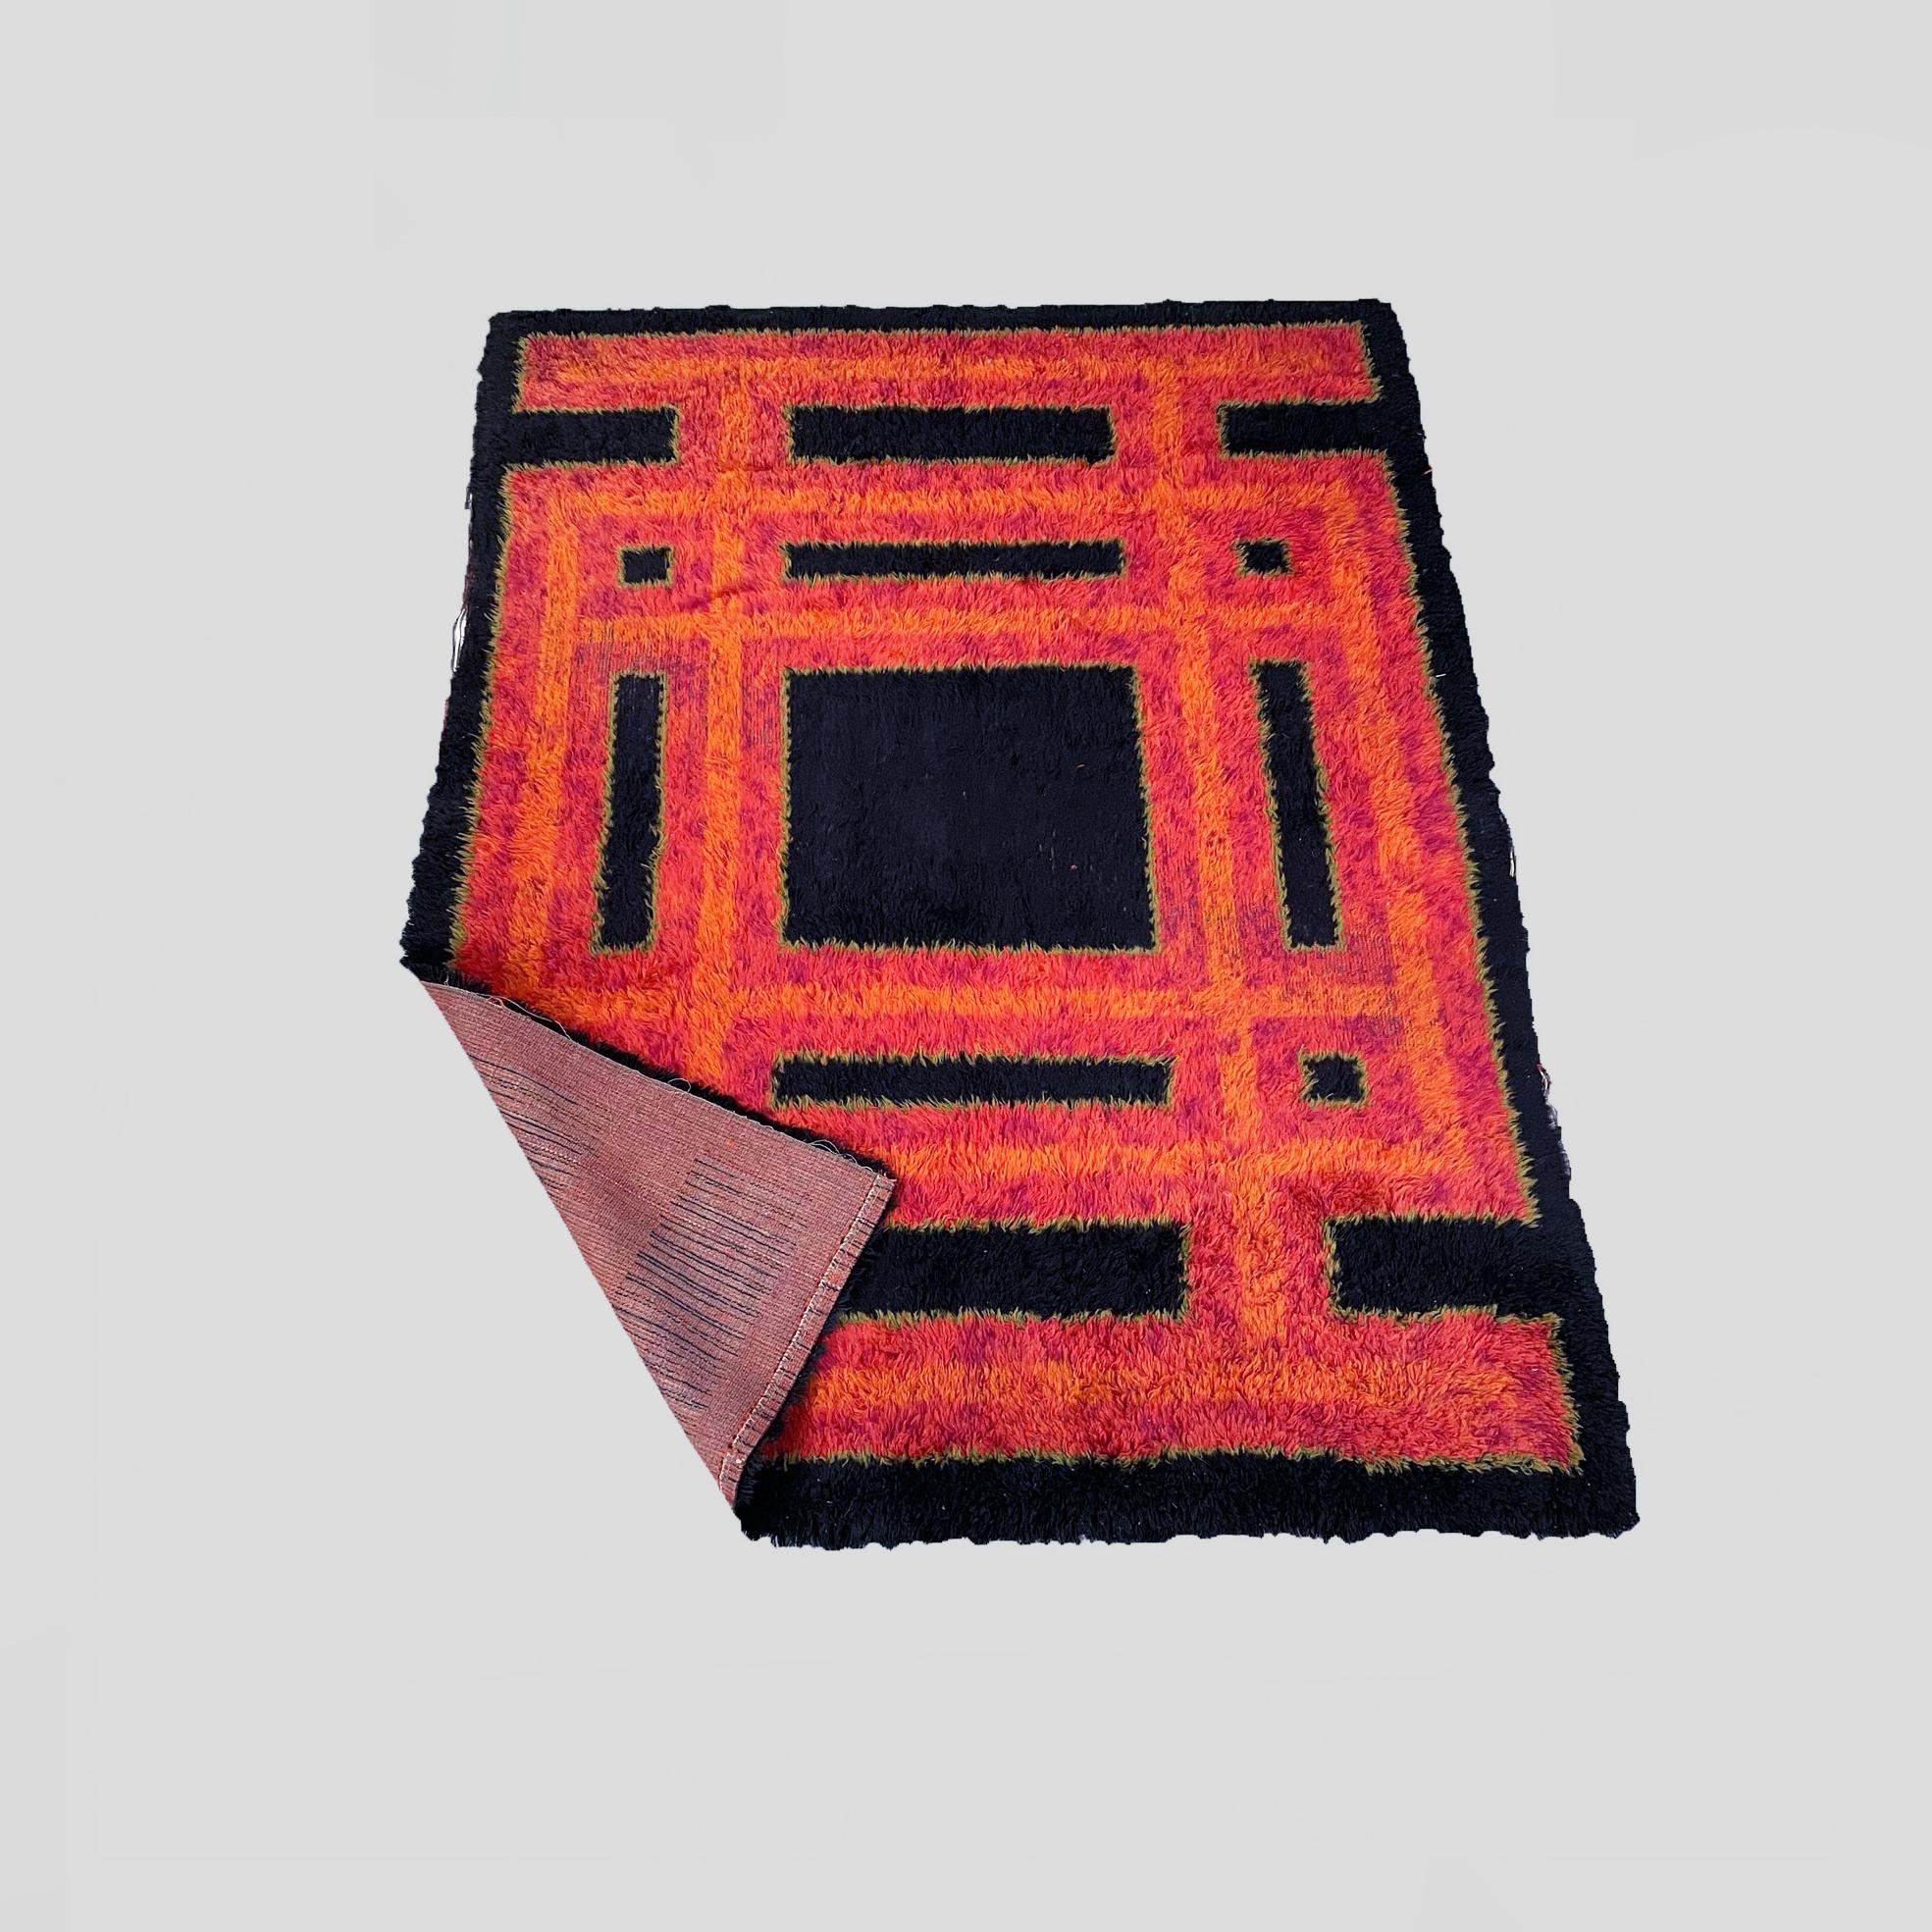 Italian mid-century long pile carpet, 1980s.
Black long pile carpet with geometric patterns in orange and red.
1980s.
Fair condition, with abrasions in the central part of the design.

Measurements: 170 x 227 cm.